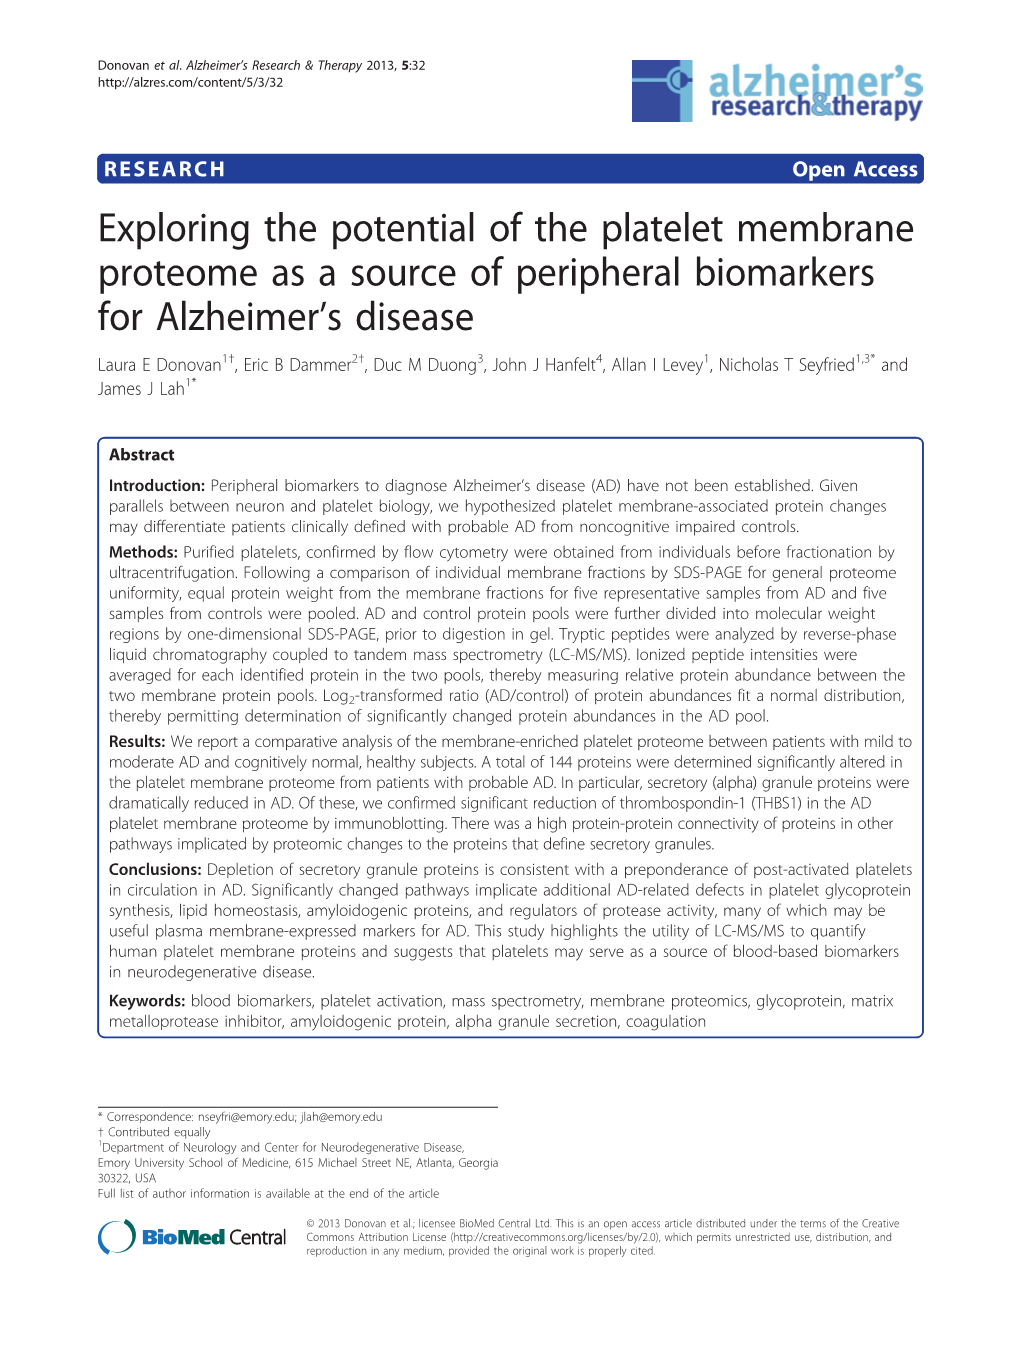 Exploring the Potential of the Platelet Membrane Proteome As a Source Of